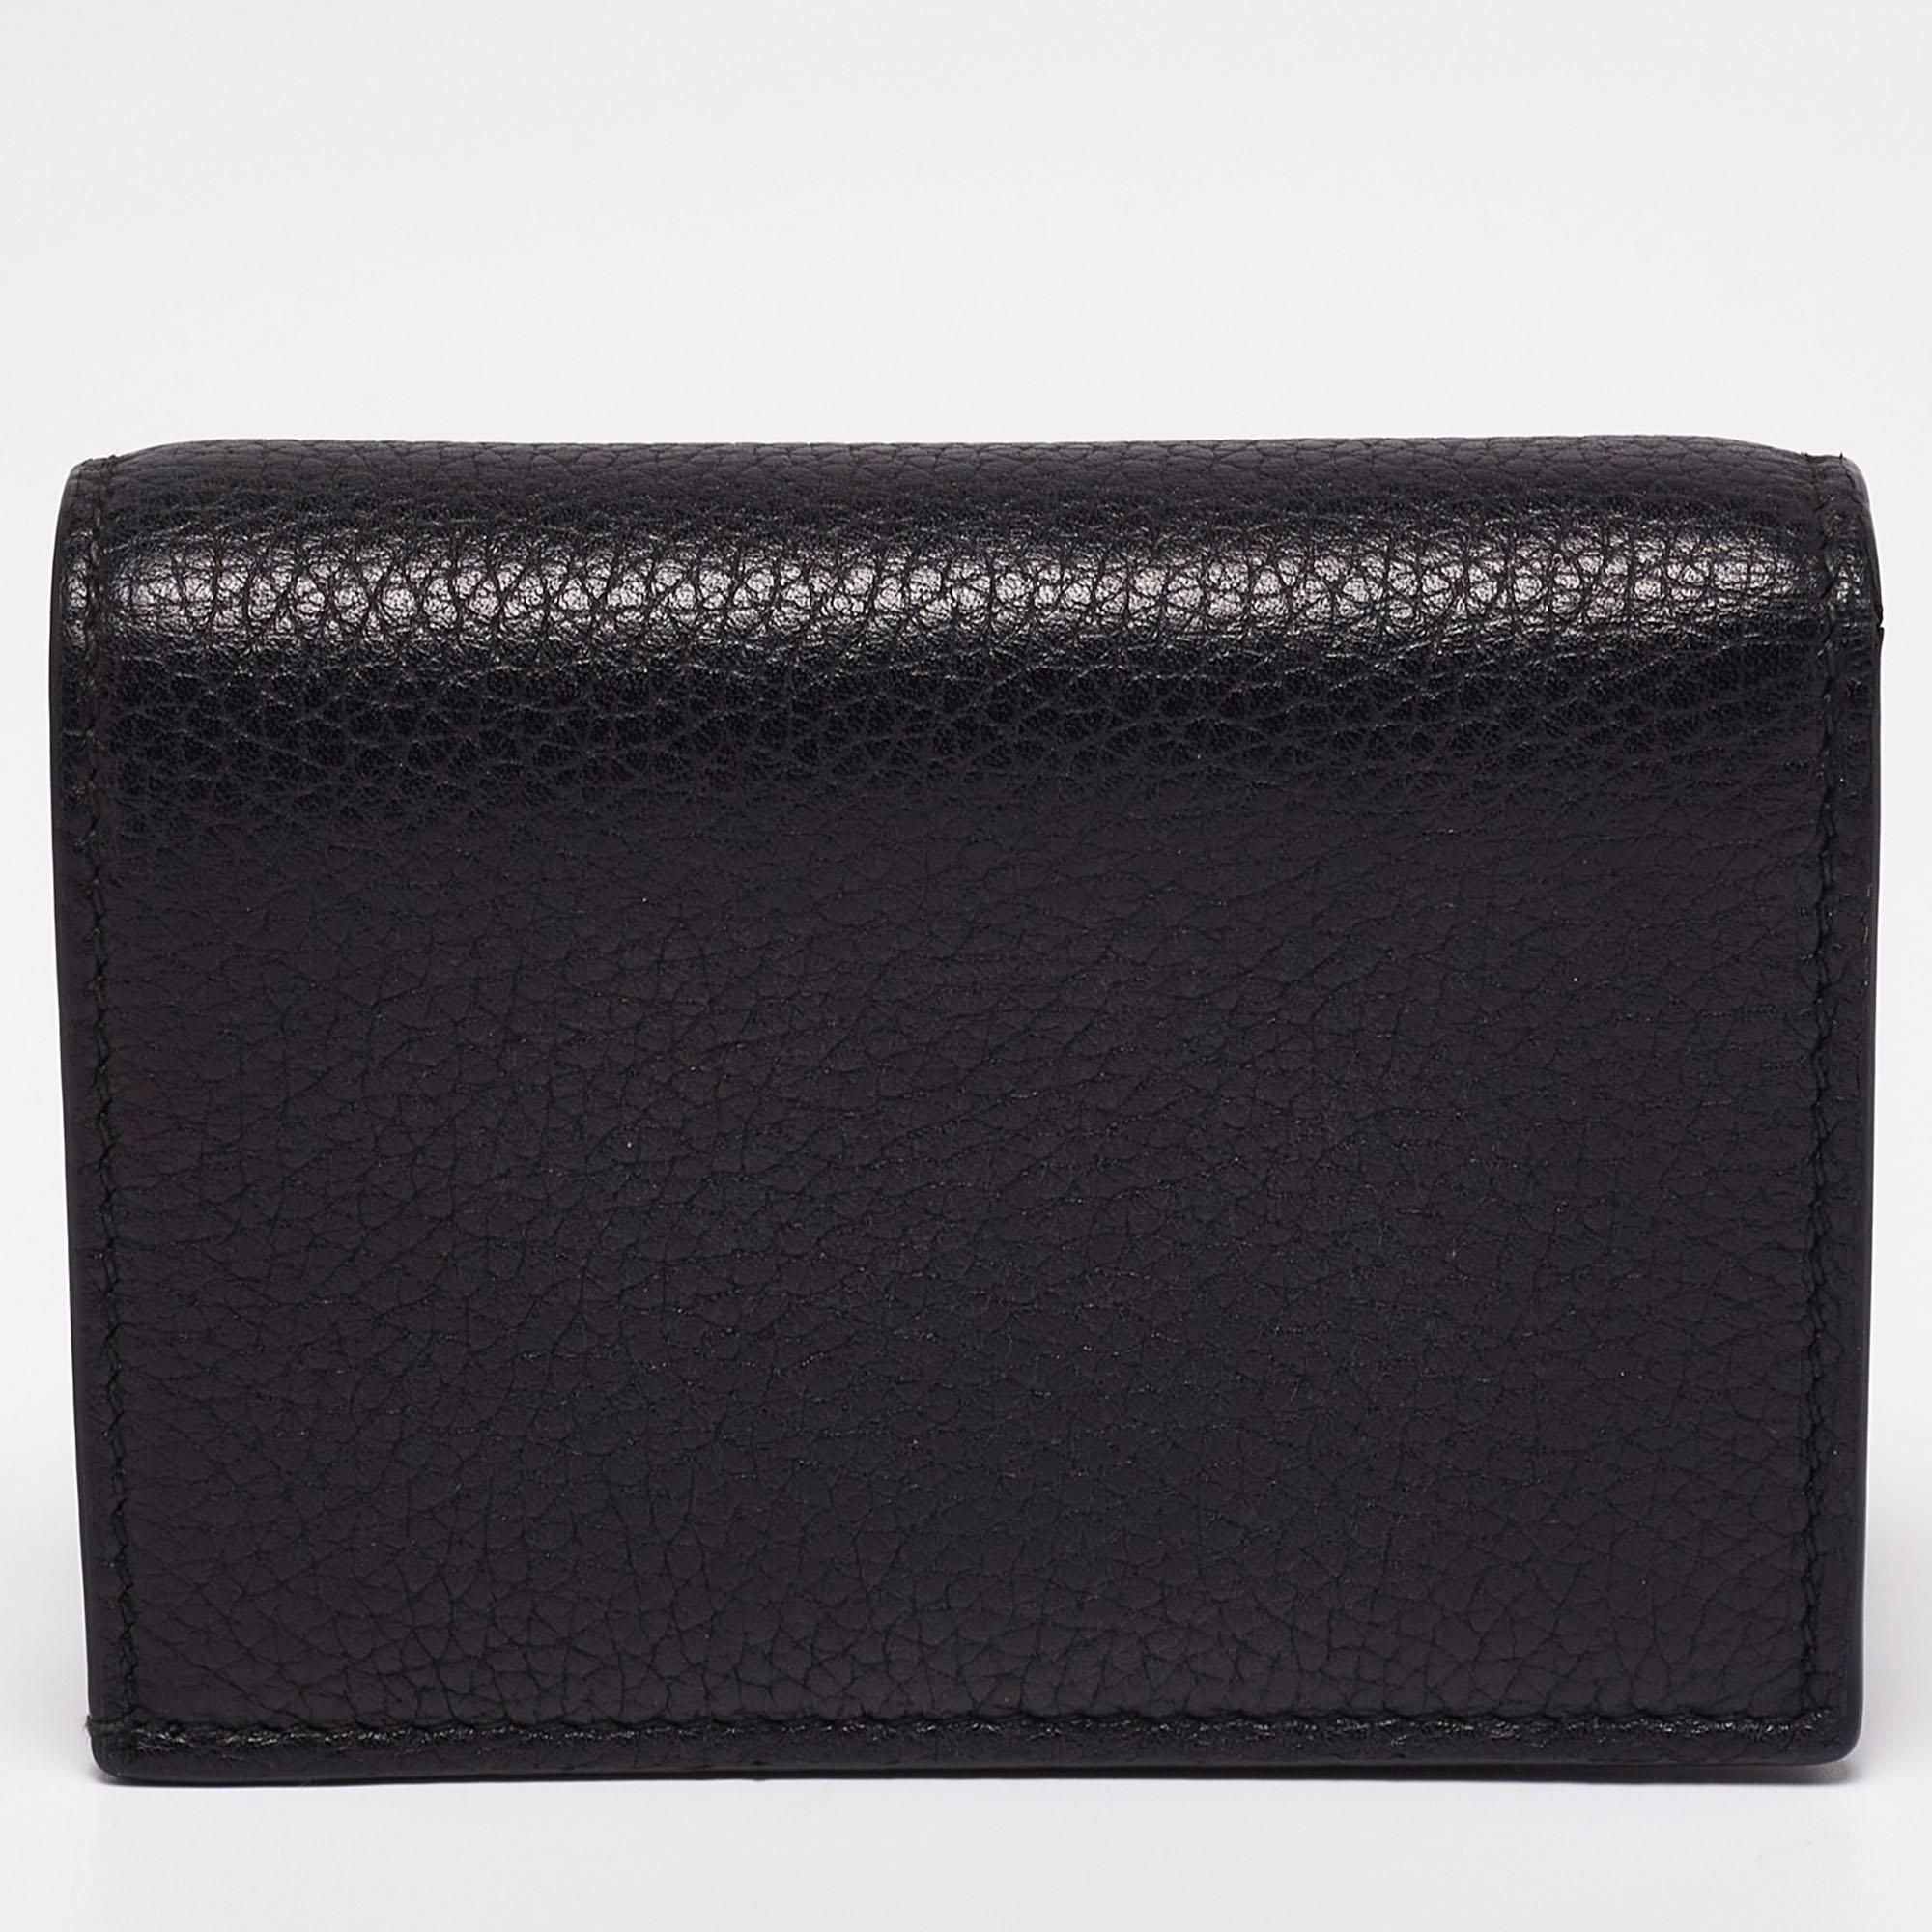 This wallet from Gucci is aesthetically pleasing and chic. It showcases a black leather exterior, with a gold-toned Bee accent and a 